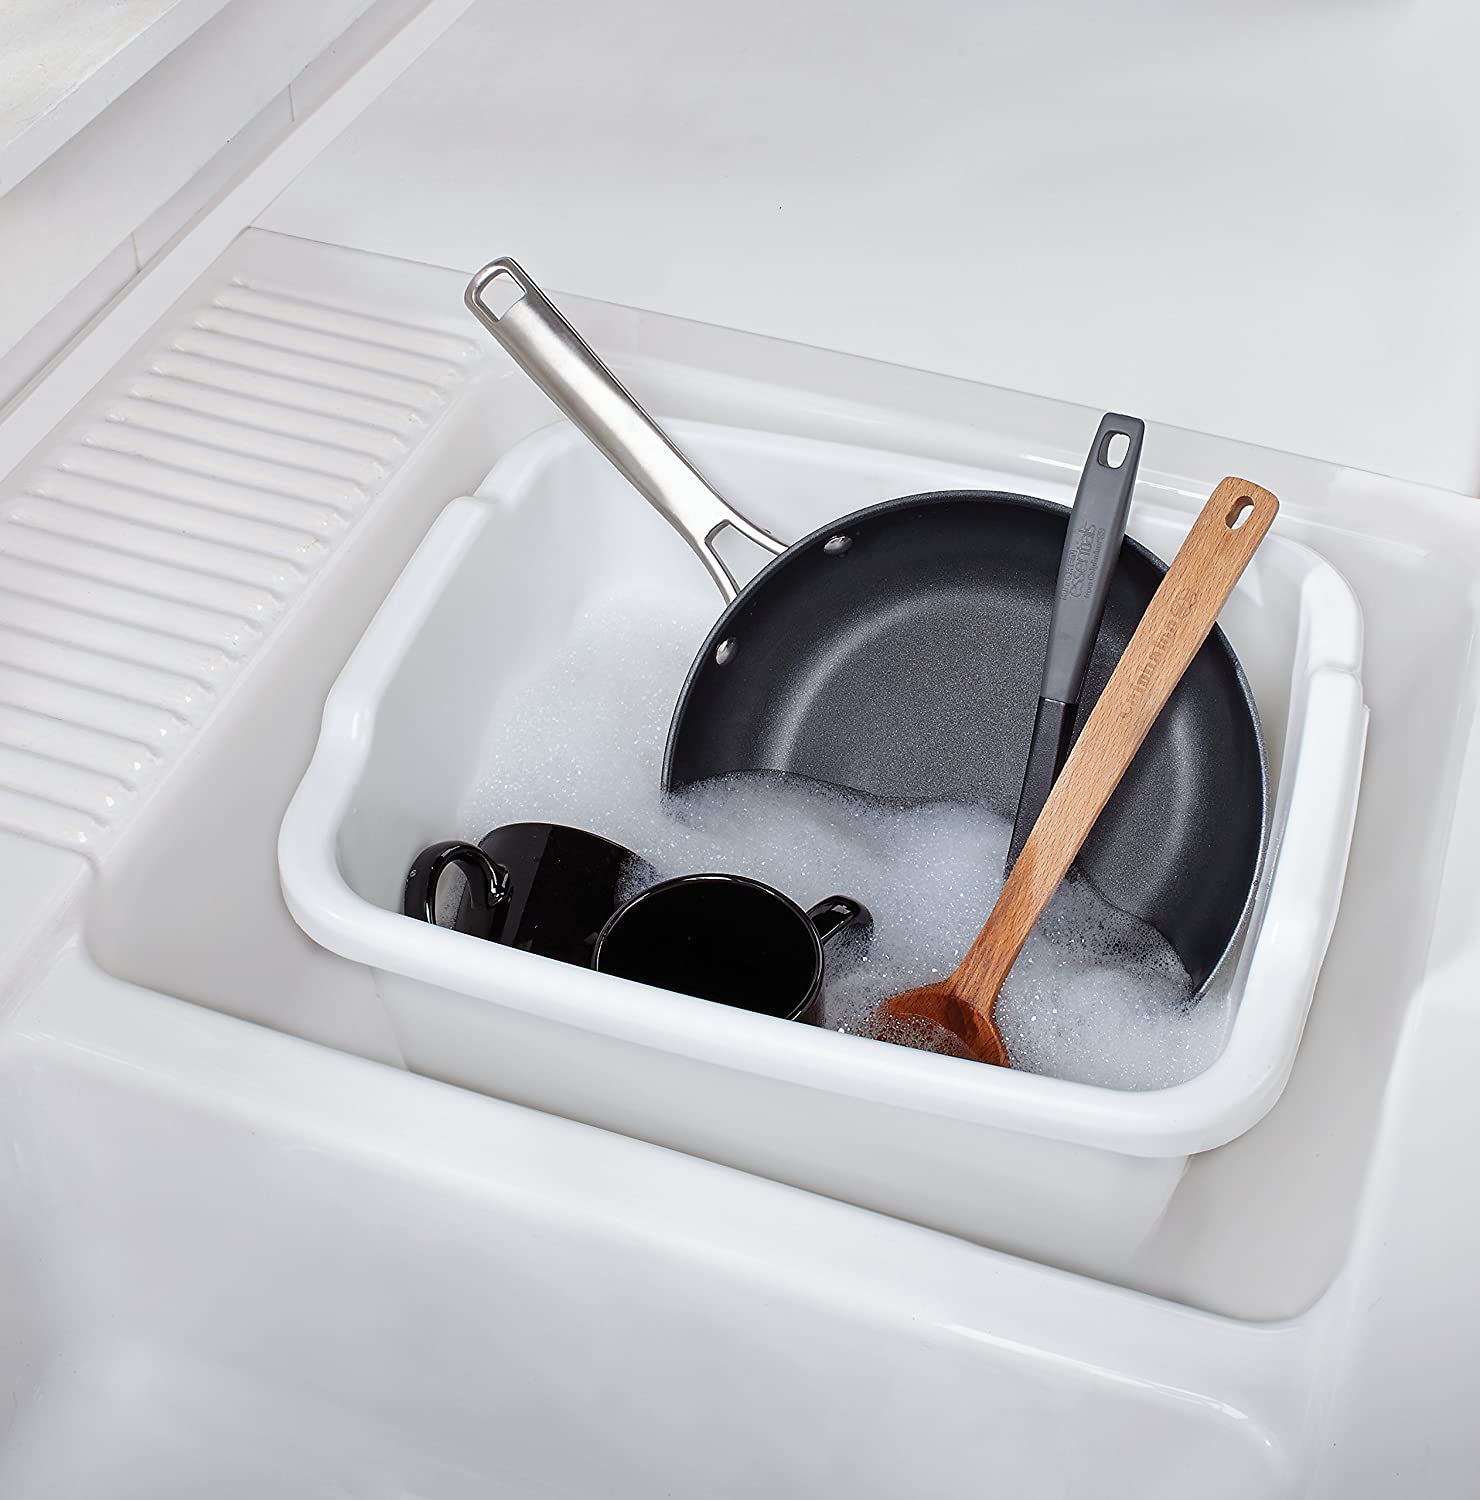 Rubbermaid Large Dishpan, White - Whole and All